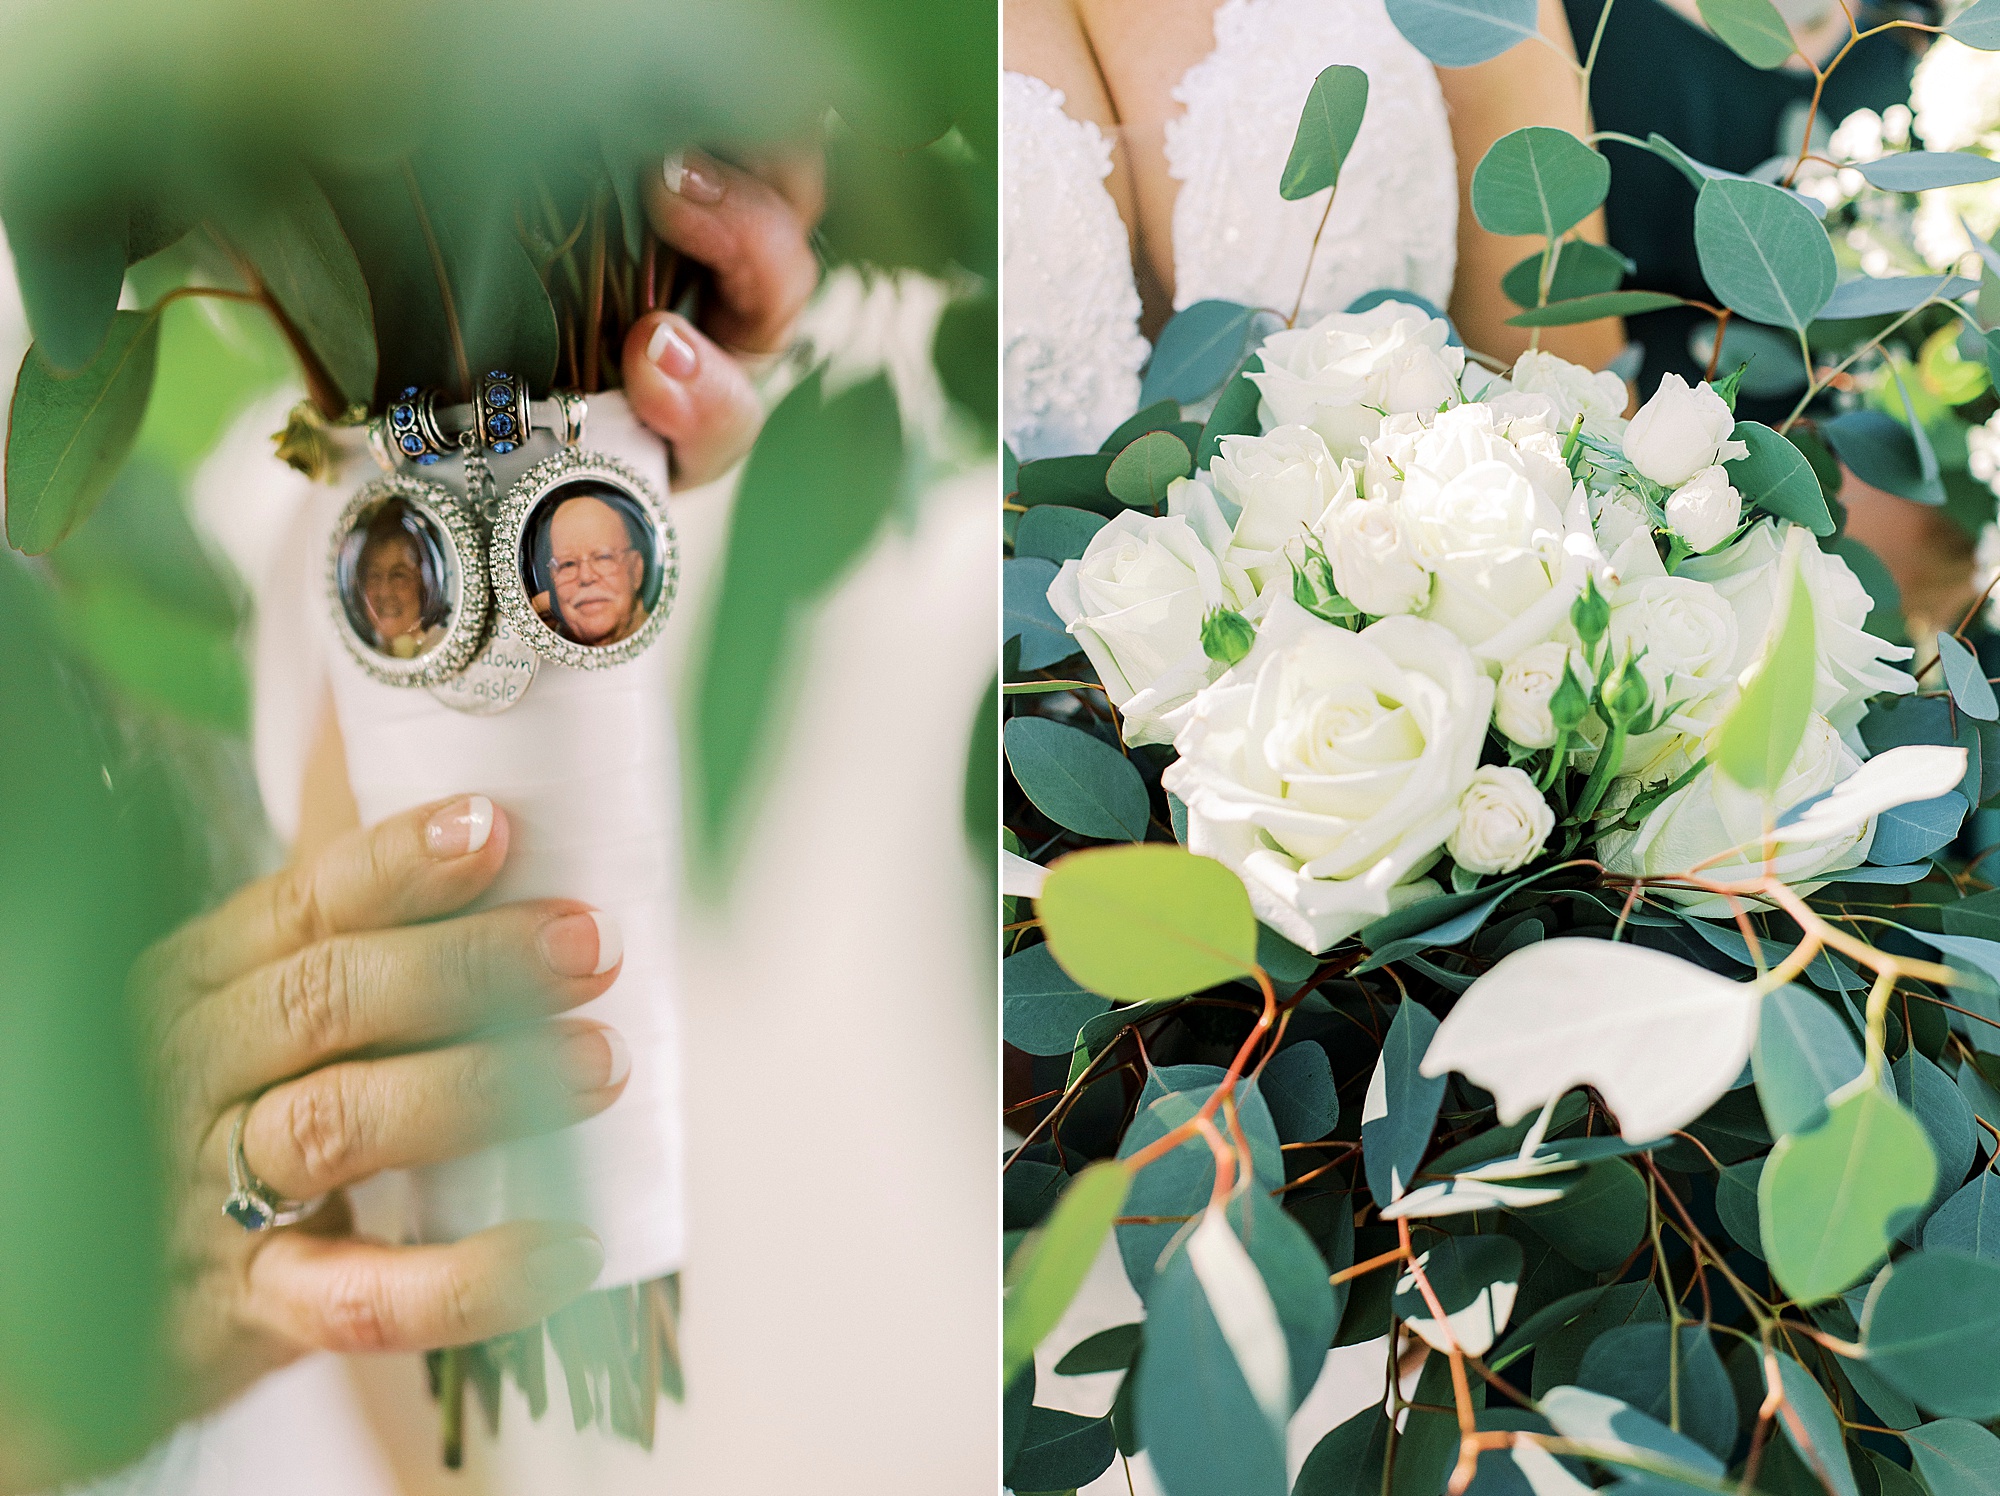 memory charms on bride's bouquet